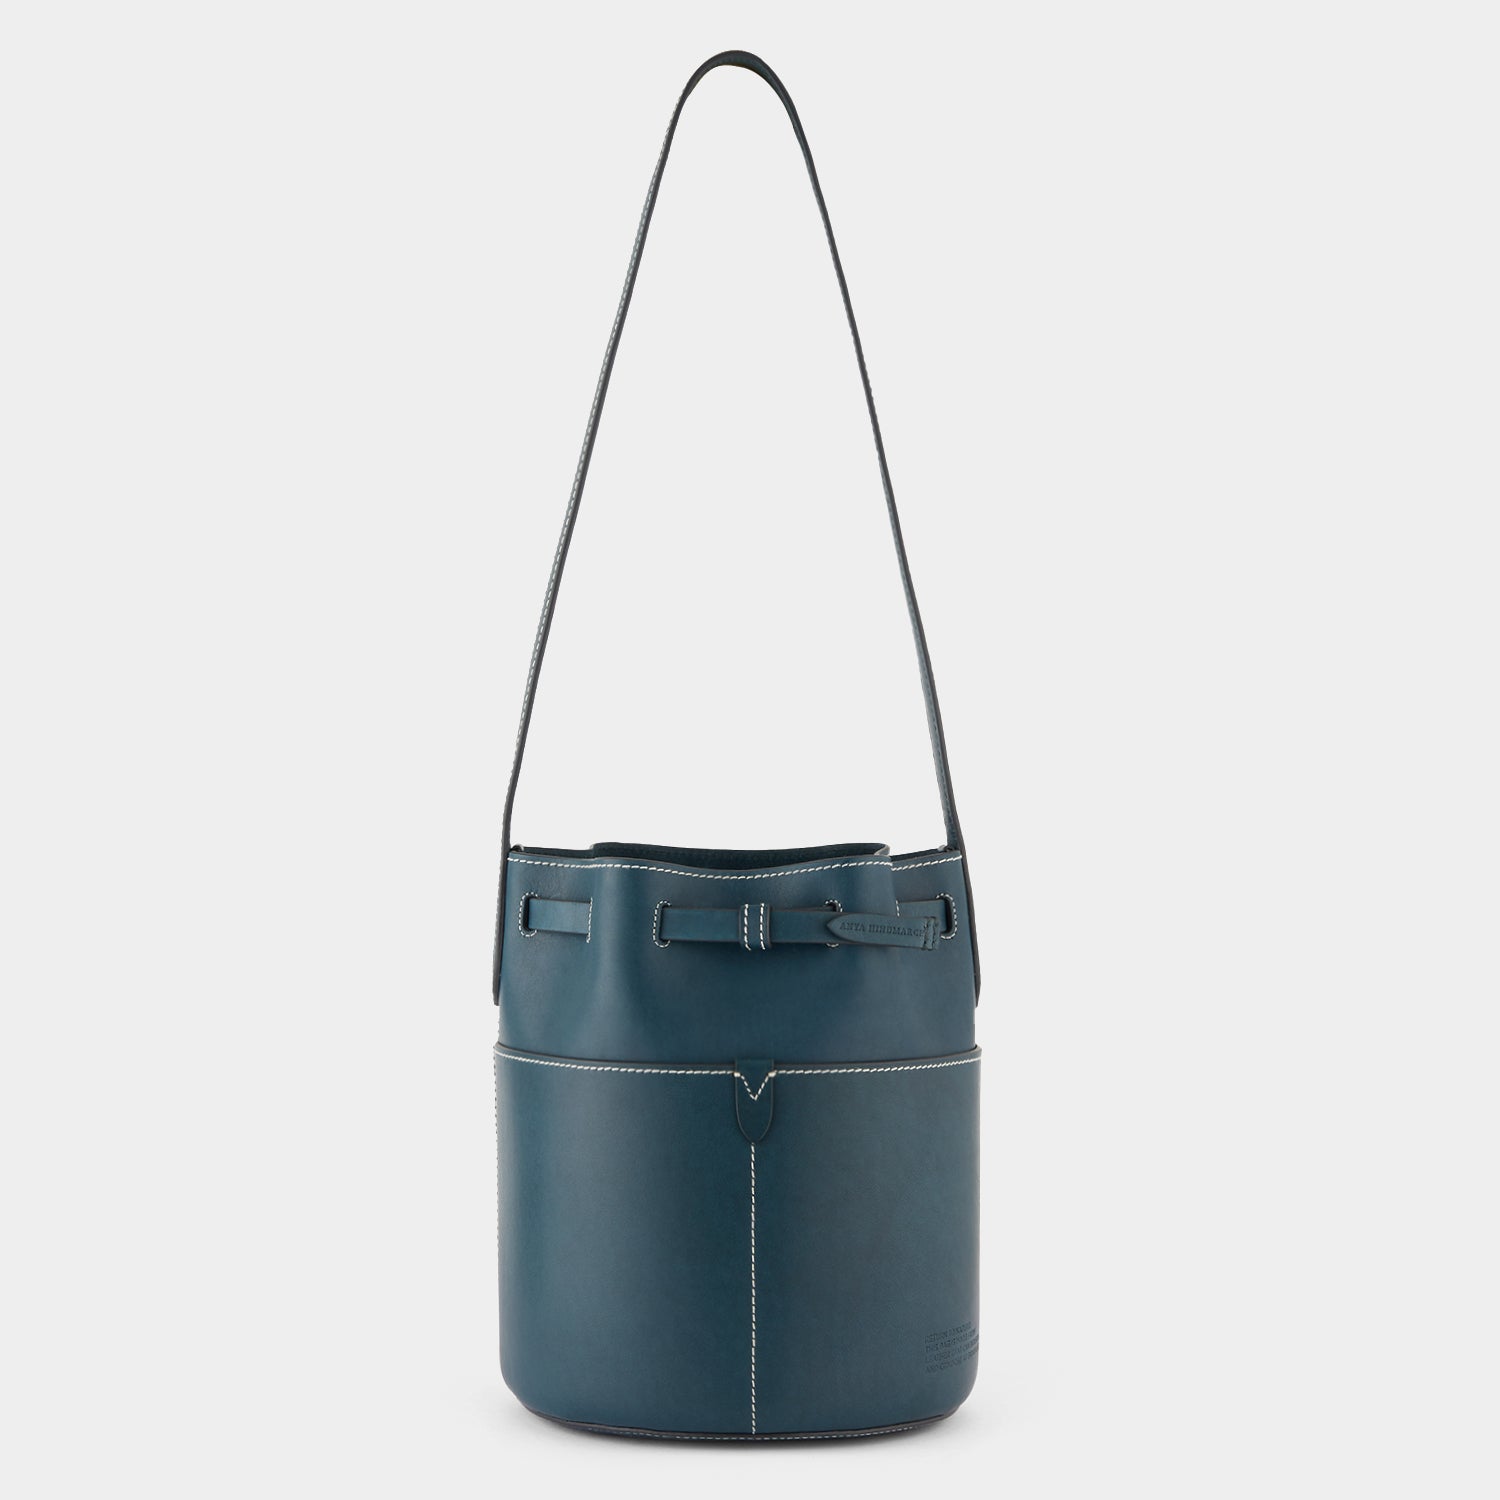 Return to Nature Small Bucket Bag -

                  
                    Compostable Leather in Dark Holly -
                  

                  Anya Hindmarch EU
